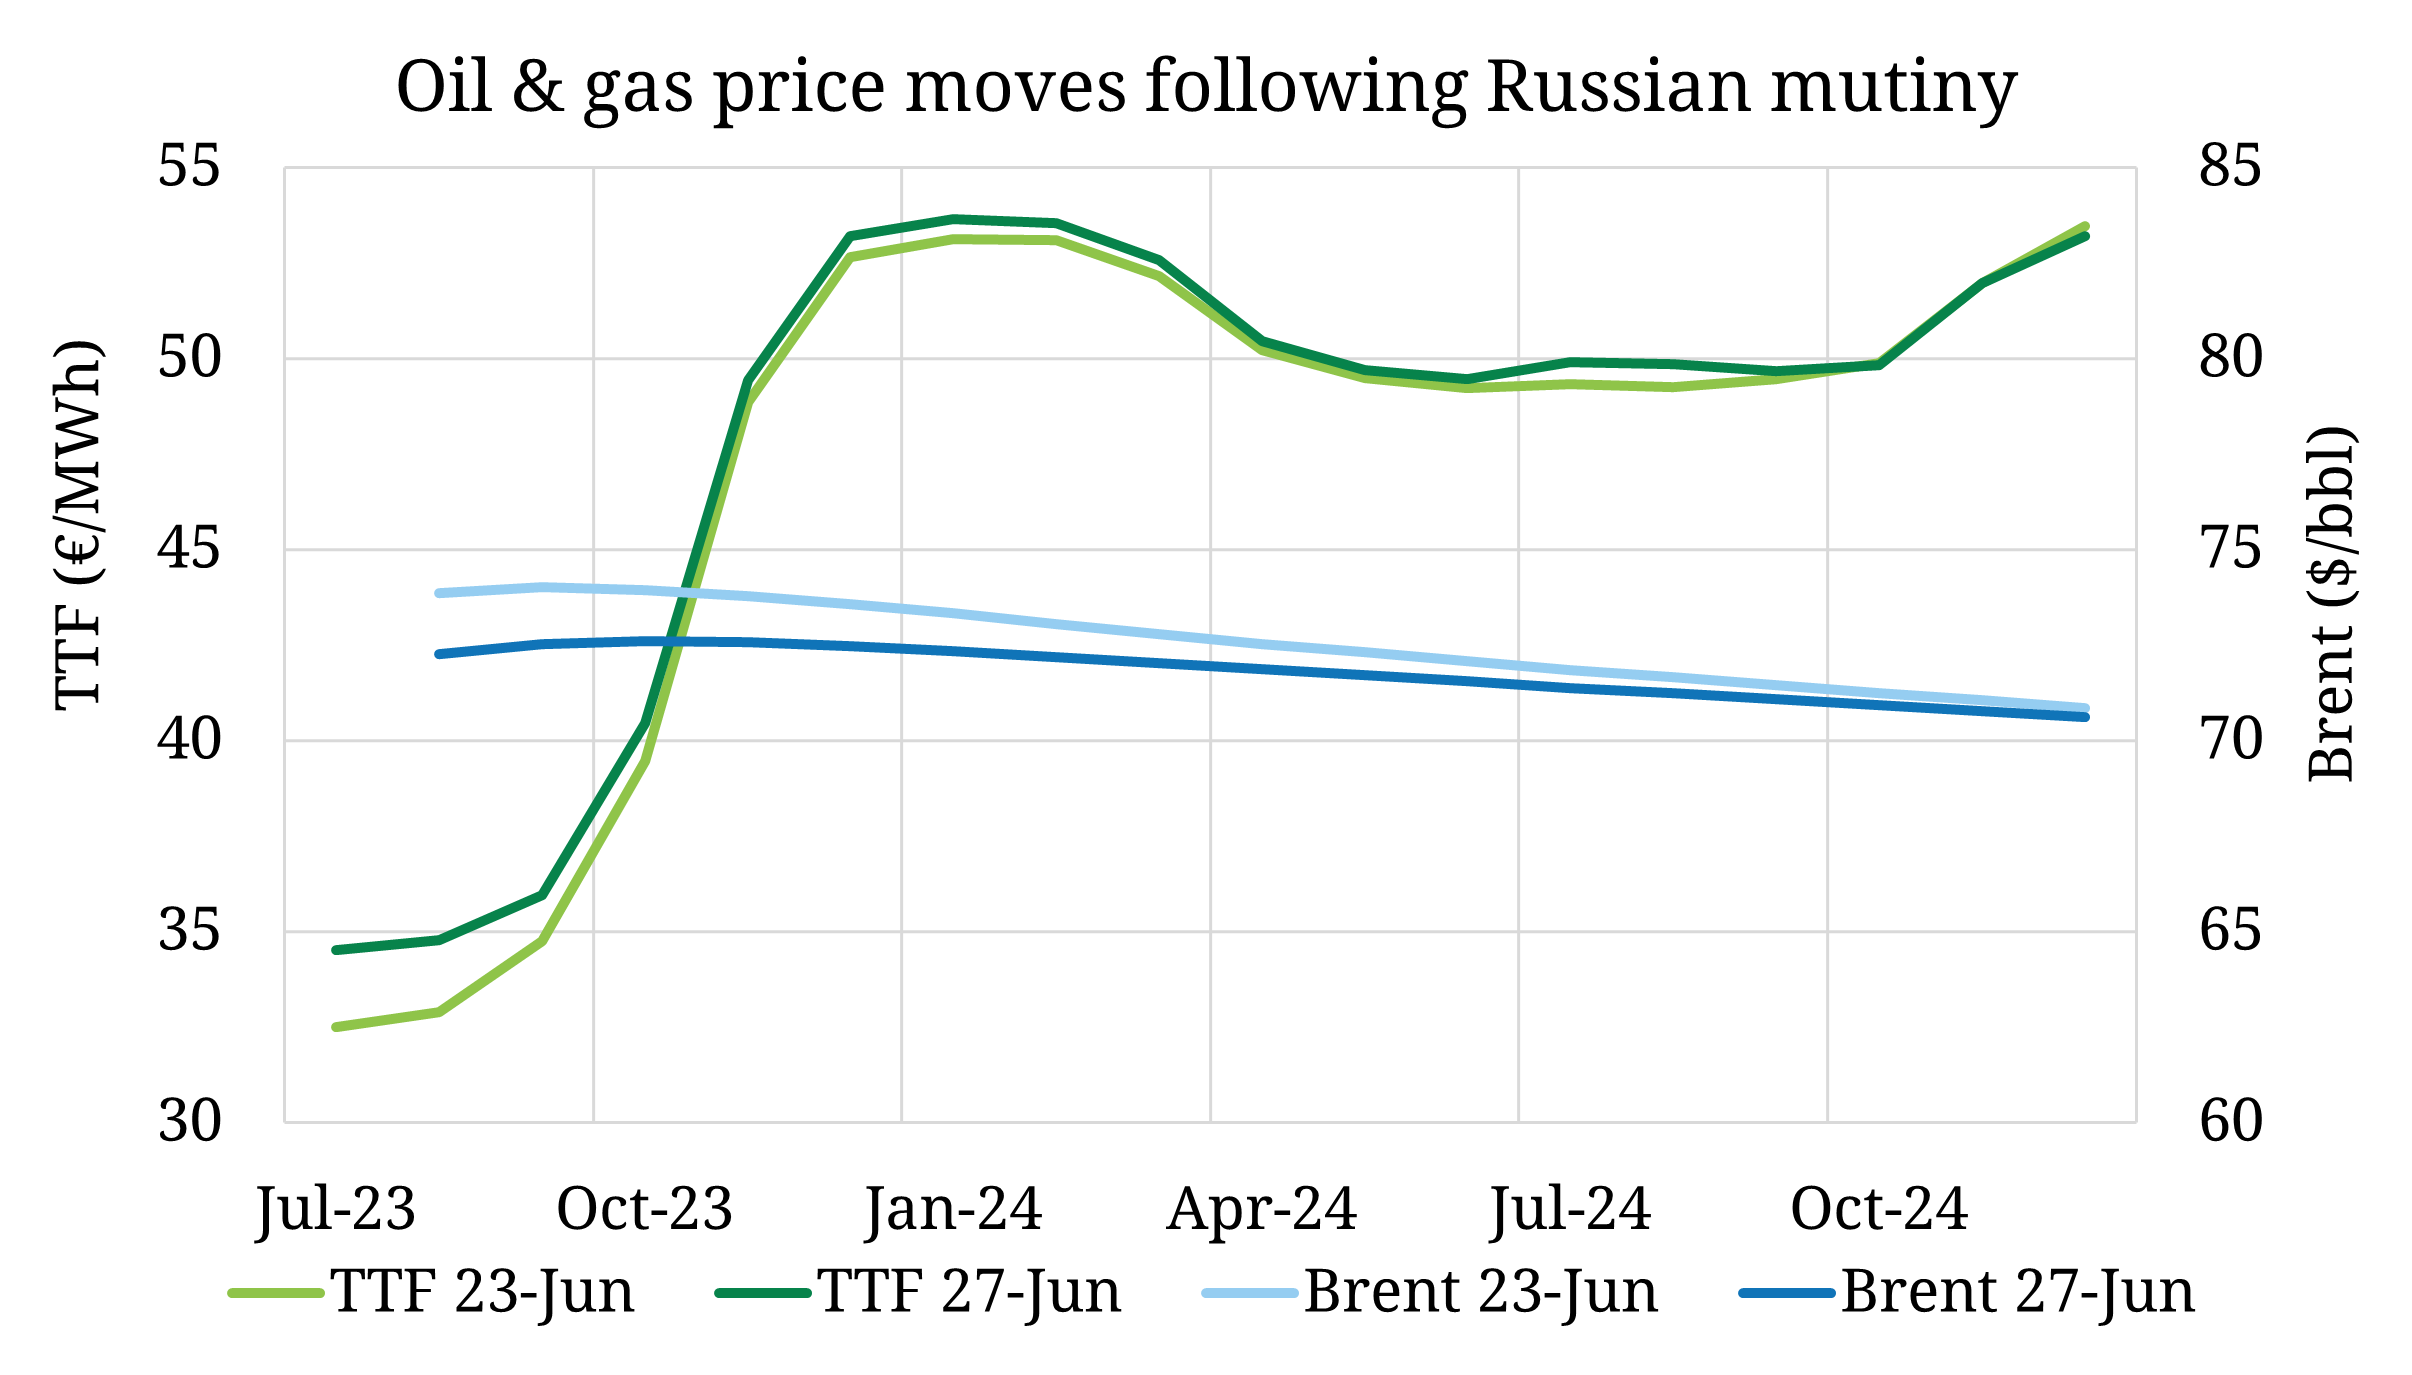 Muted market response to Russian mutiny, but tail risks remain